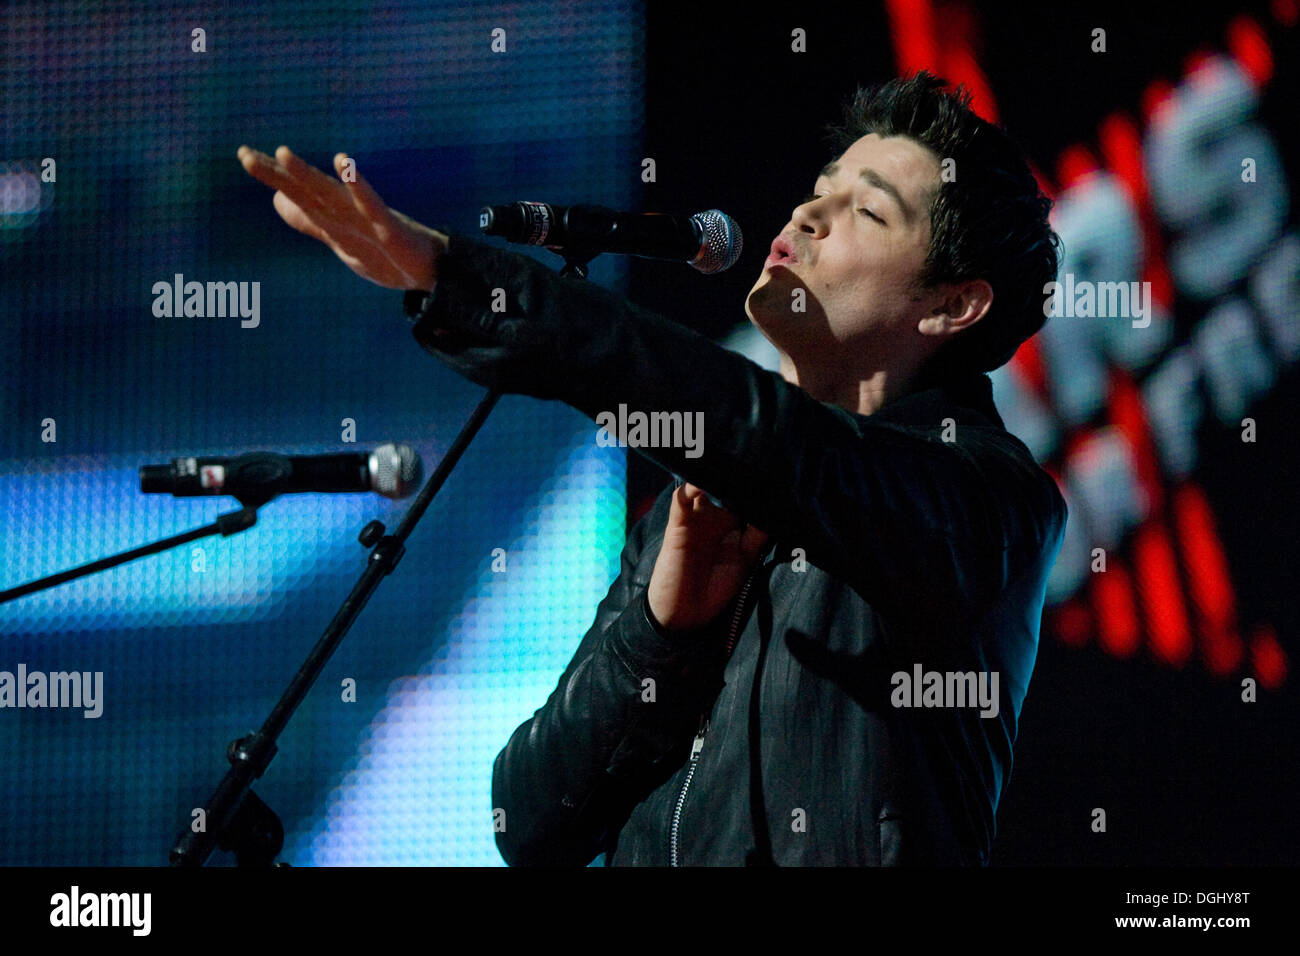 Danny O'Donoghue, singer of the Irish band The Script, live at the Energy Stars For Free in the Zurich stadium, Switzerland Stock Photo